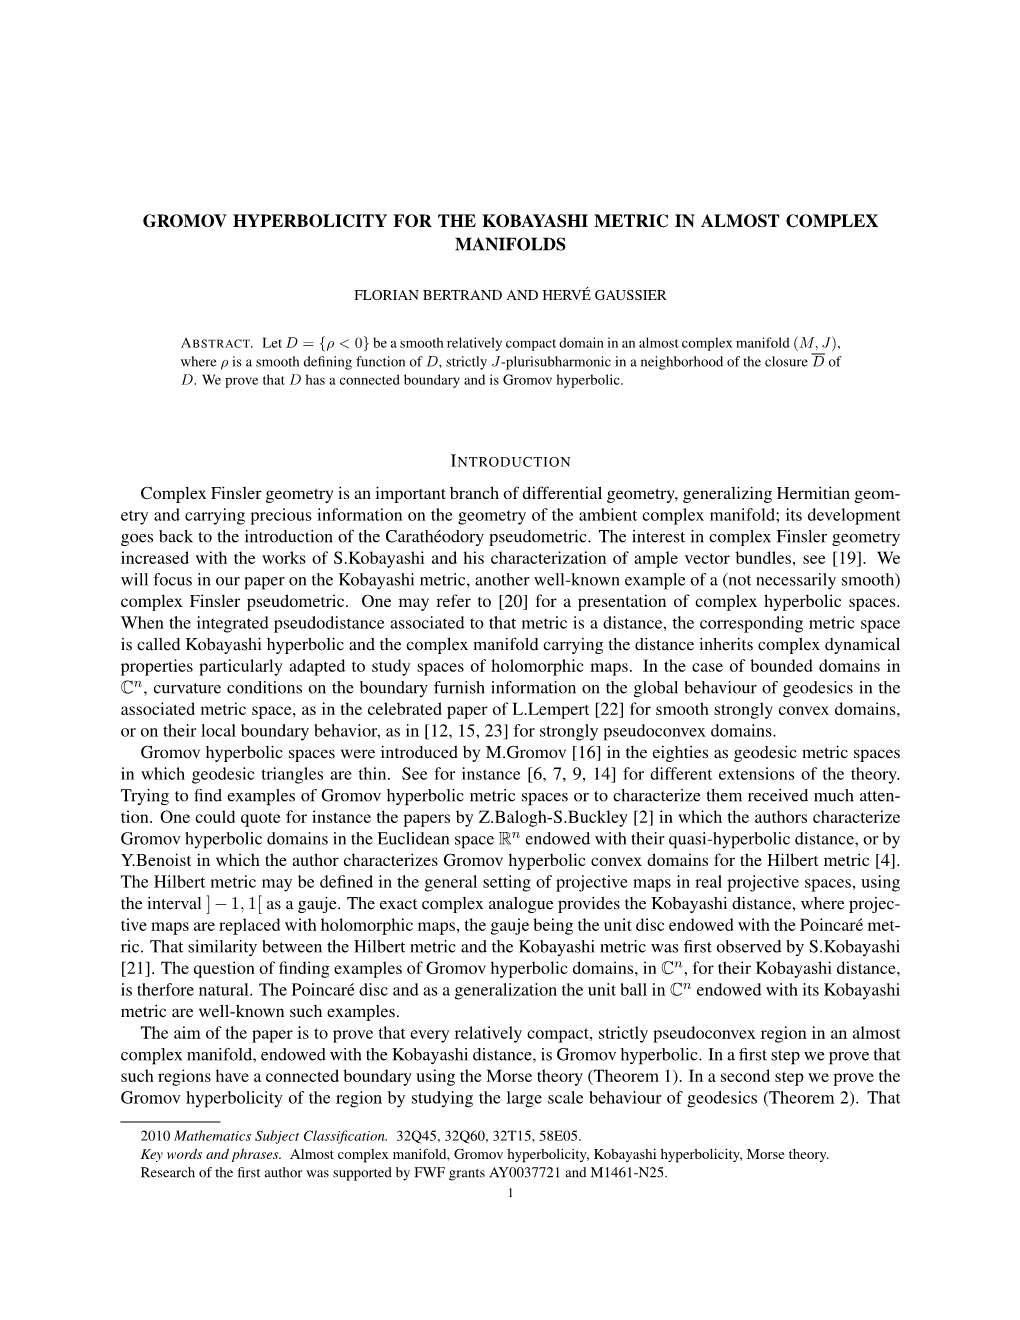 Gromov Hyperbolicity for the Kobayashi Metric in Almost Complex Manifolds